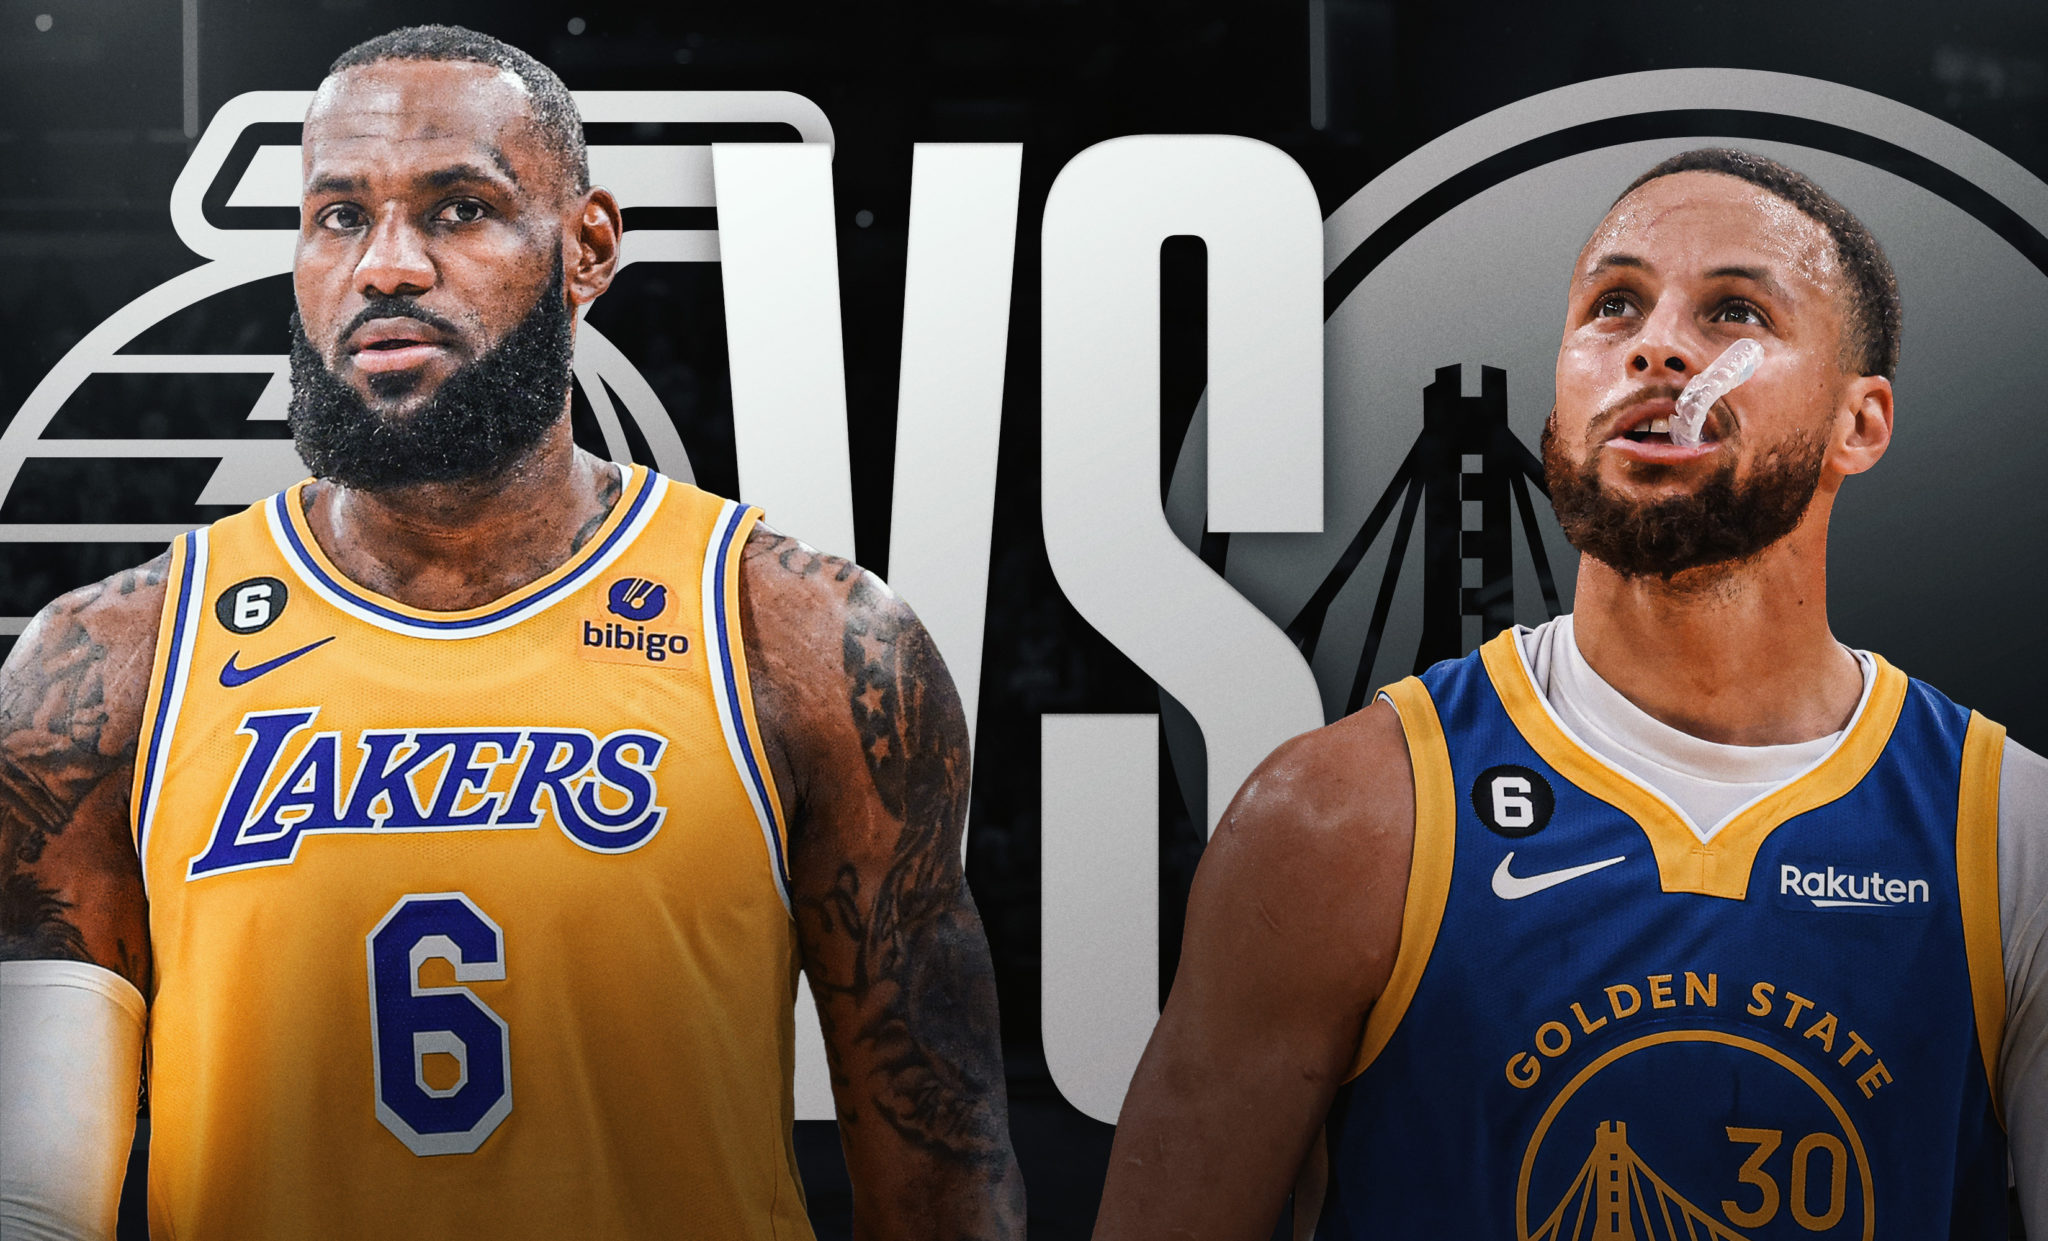 Is Steph Curry Playing? Warriors vs. Lakers Game 5 Playoff Preview, Odds & Predictions